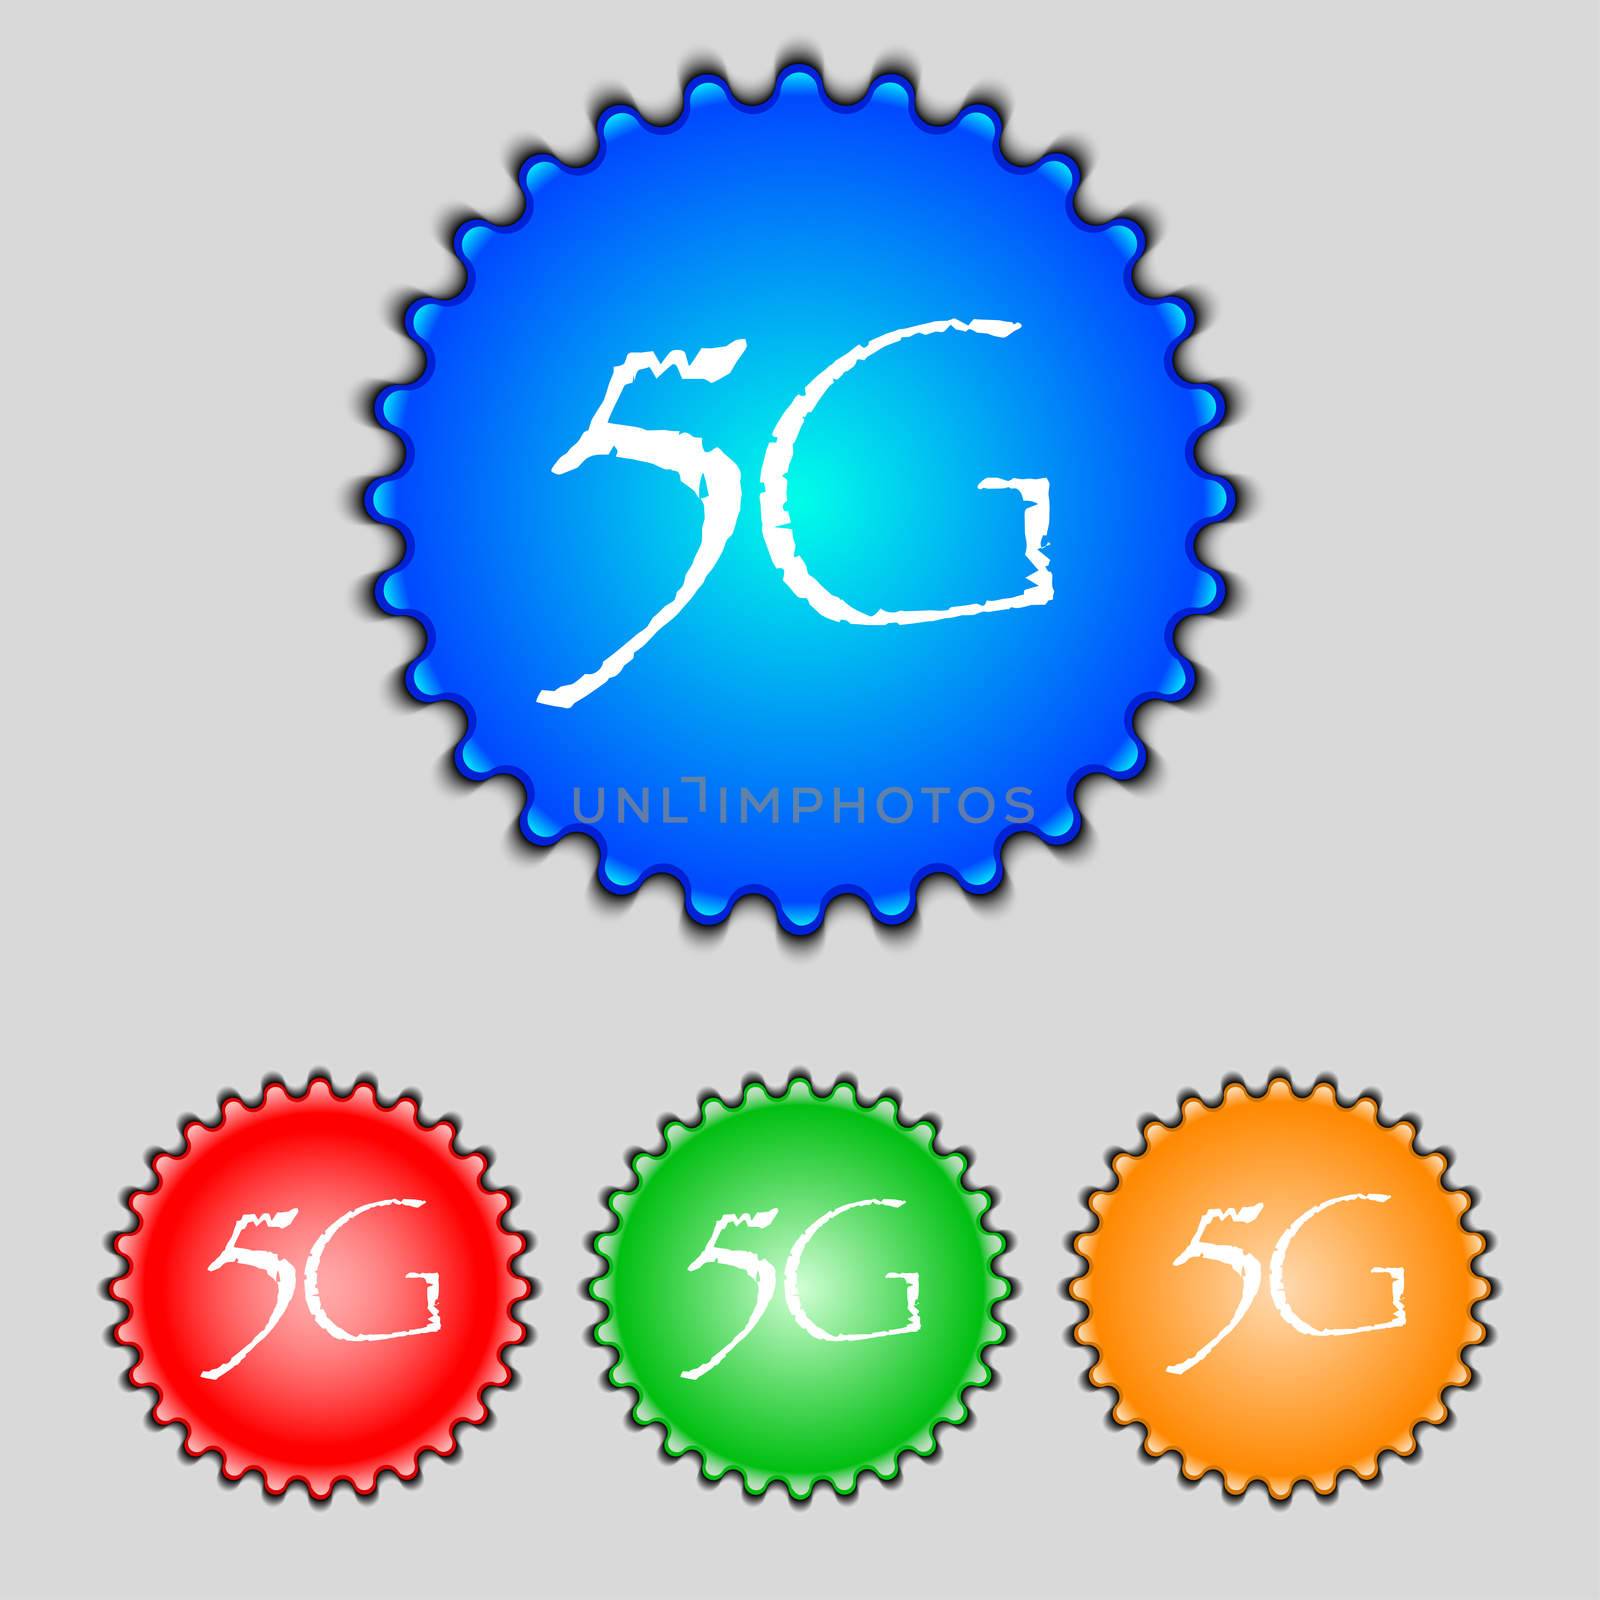 5G sign icon. Mobile telecommunications technology symbol. Set of colour buttons. illustration